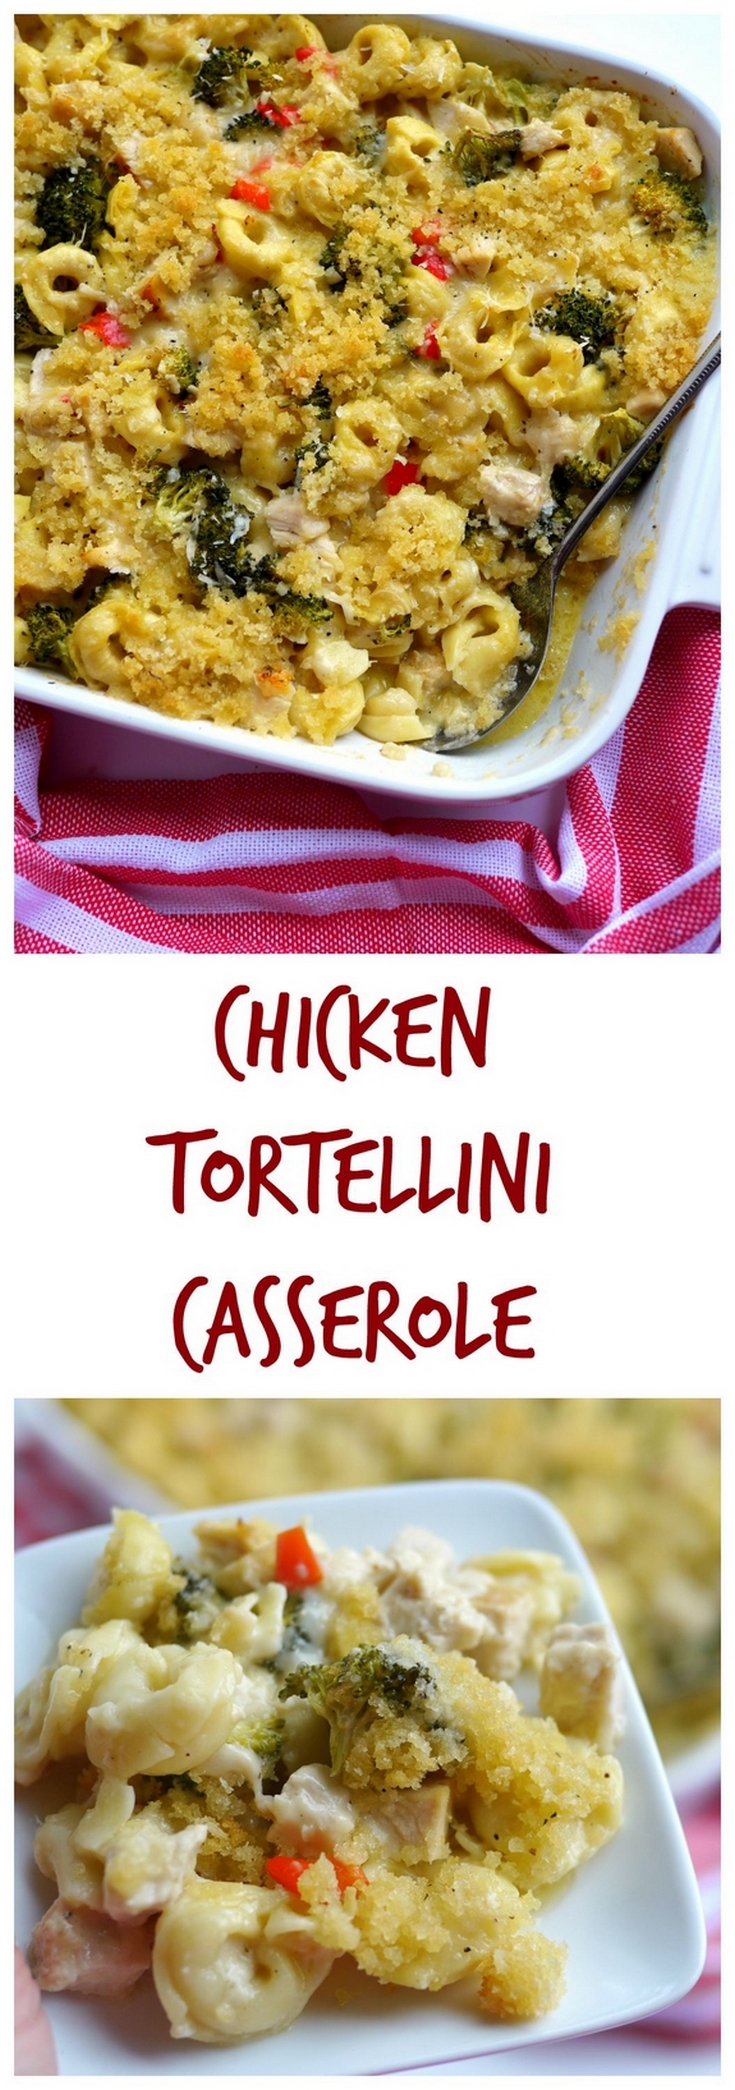 VIDEO + RECIPE: A cheesy-filled casserole filled with leftover chicken or turkey and served to the masses. This is the perfect family and kid-friendly dinner you've been looking for from NoblePig.com. via @cmpollak1